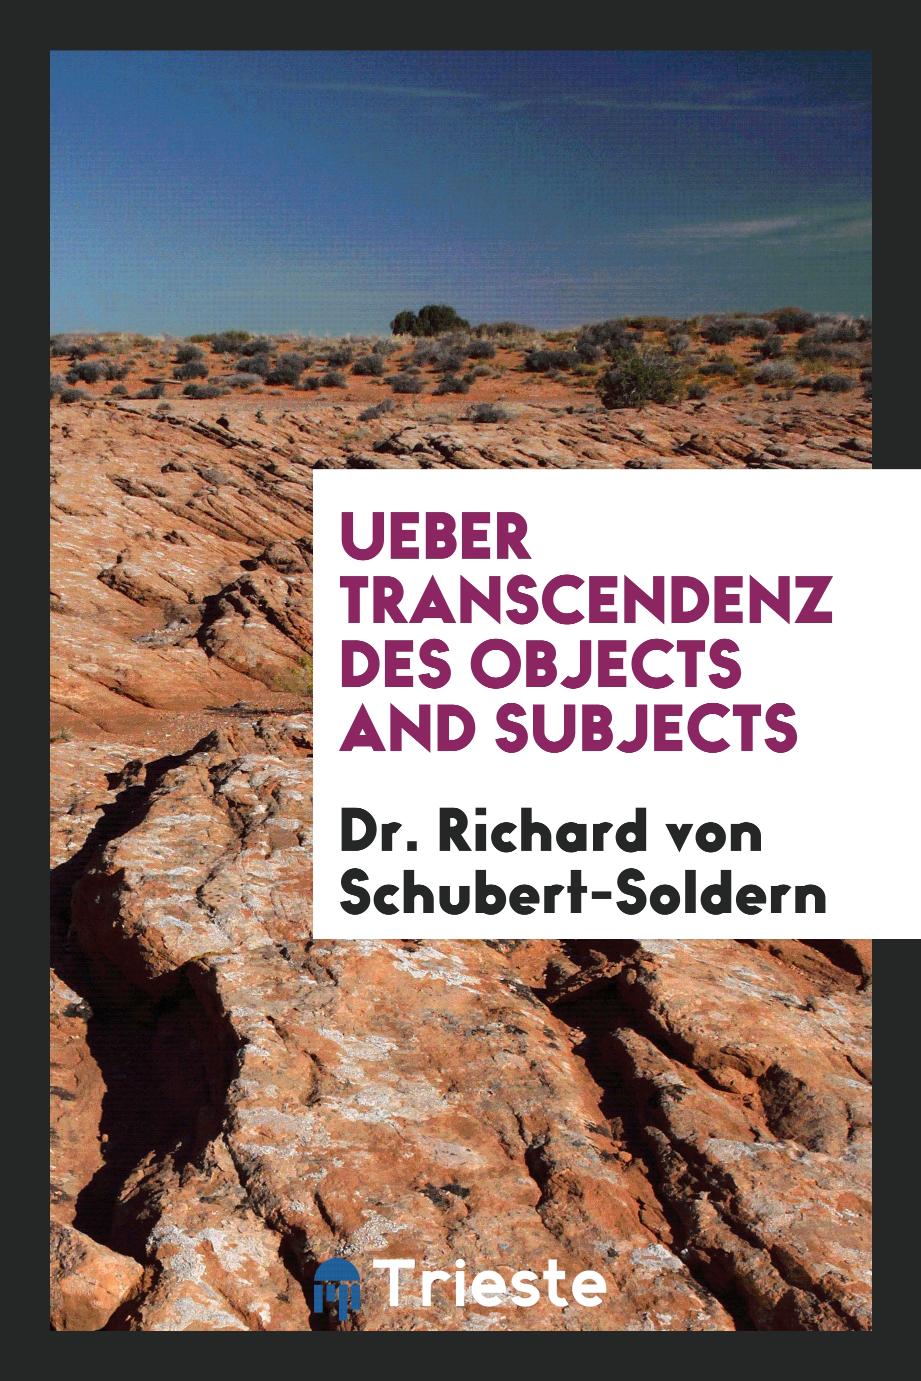 Ueber Transcendenz des Objects and Subjects